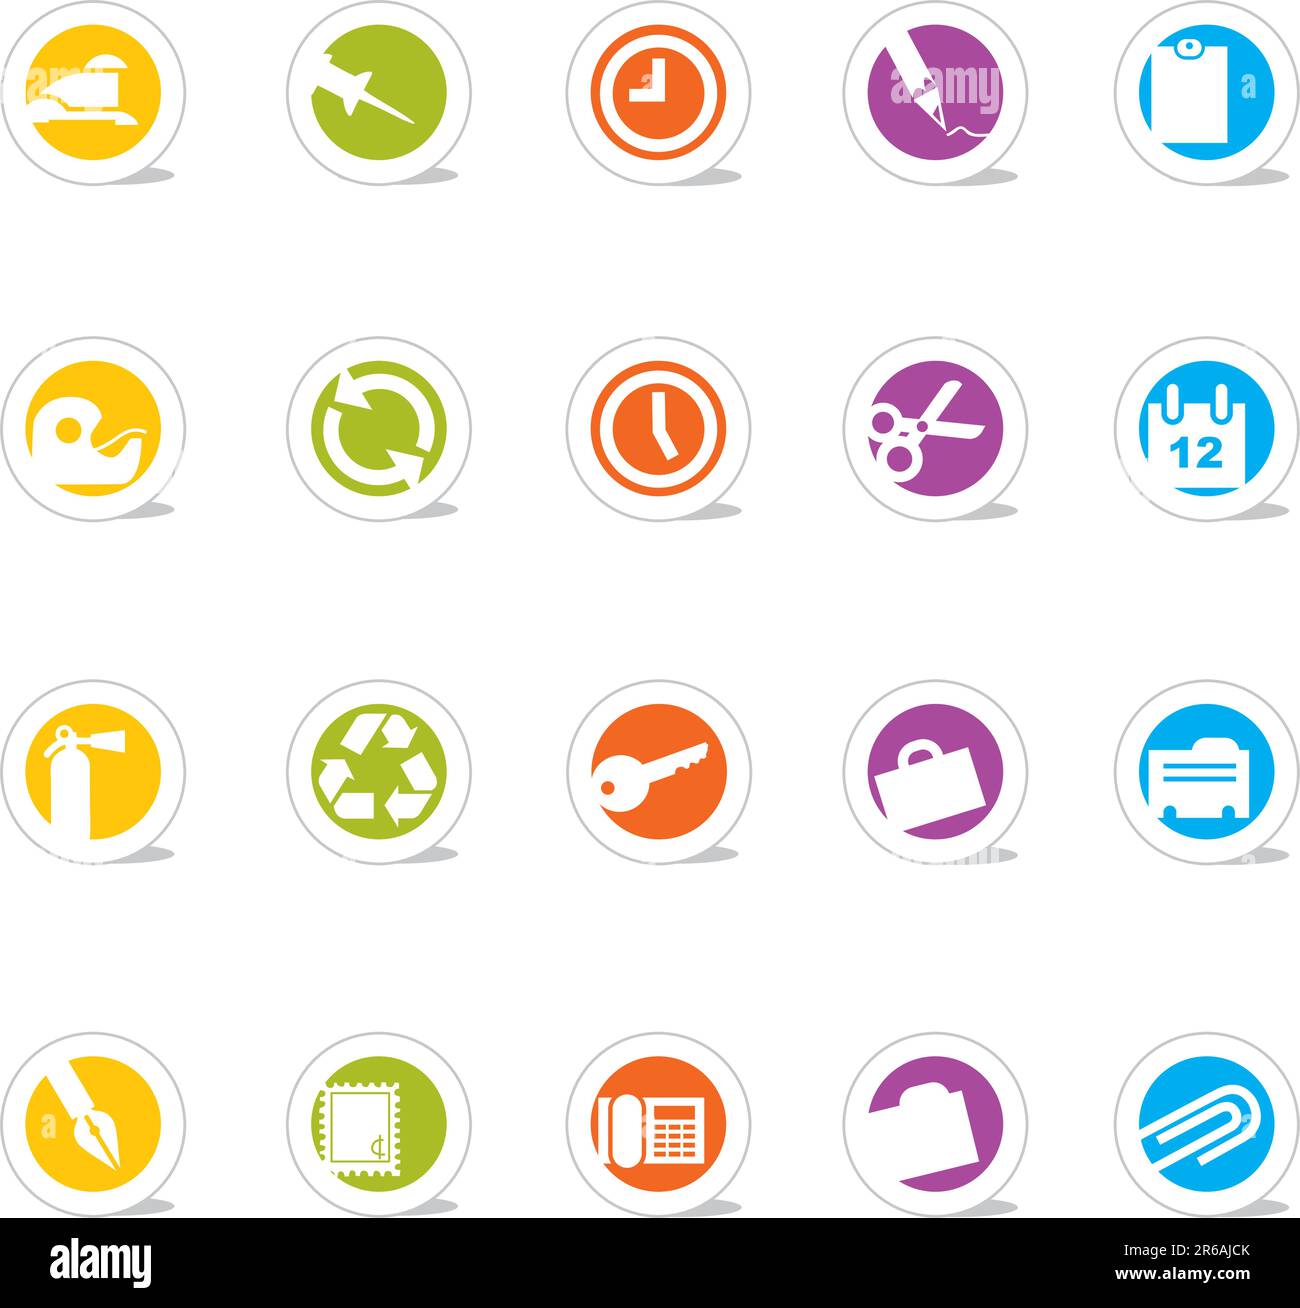 Simple Icons Office this and that--Nice set of colorful icons Stock Vector